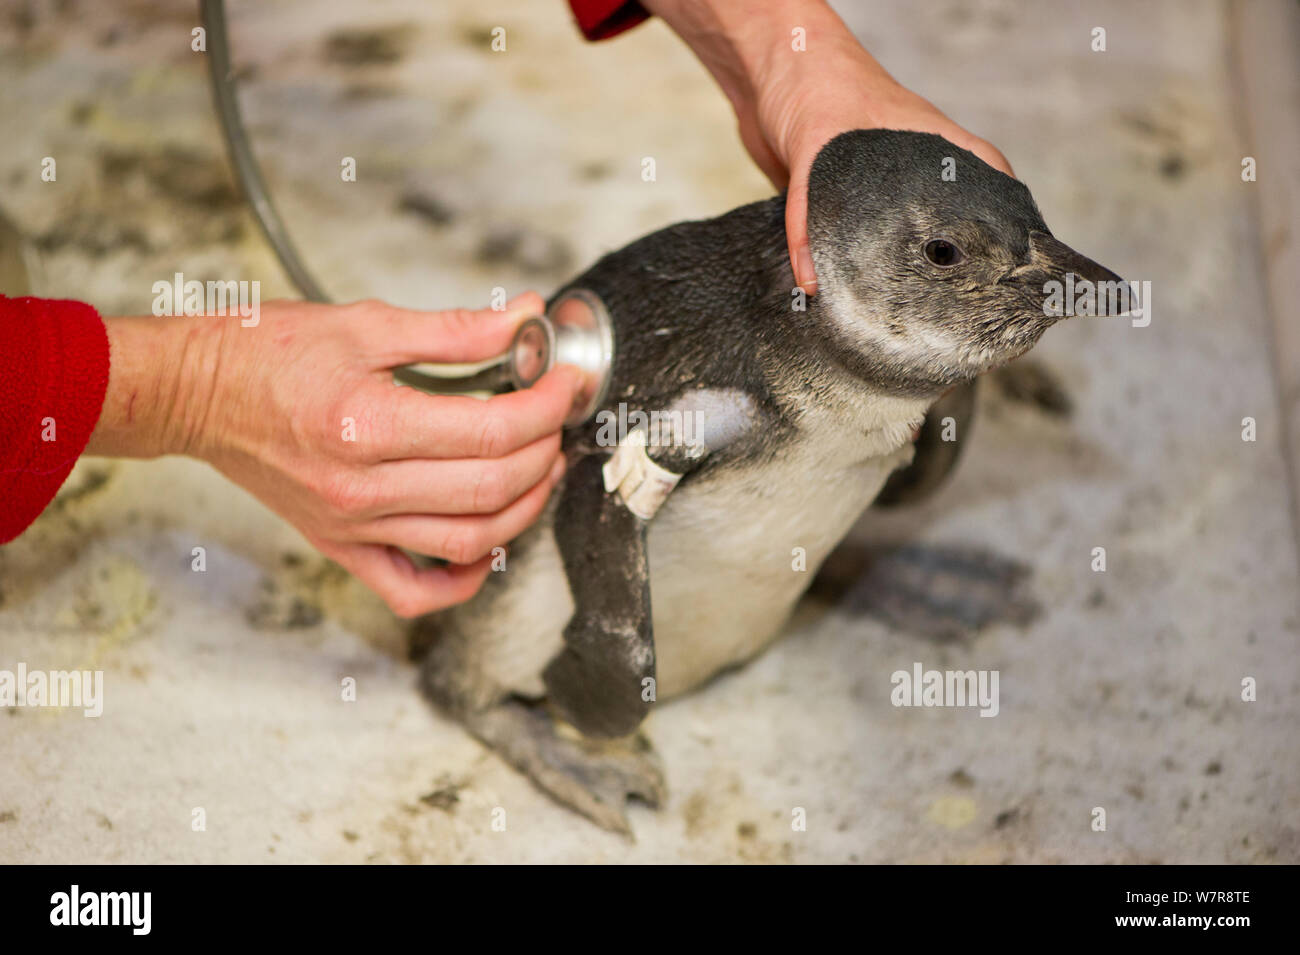 African penguin (Spheniscus demersus) chick being checked by vet with a stephoscope, part of Chick Bolstering Project, Southern African Foundation for the Conservation of Coastal Birds (SANCCOB), South Africa captive, May 2012. Stock Photo